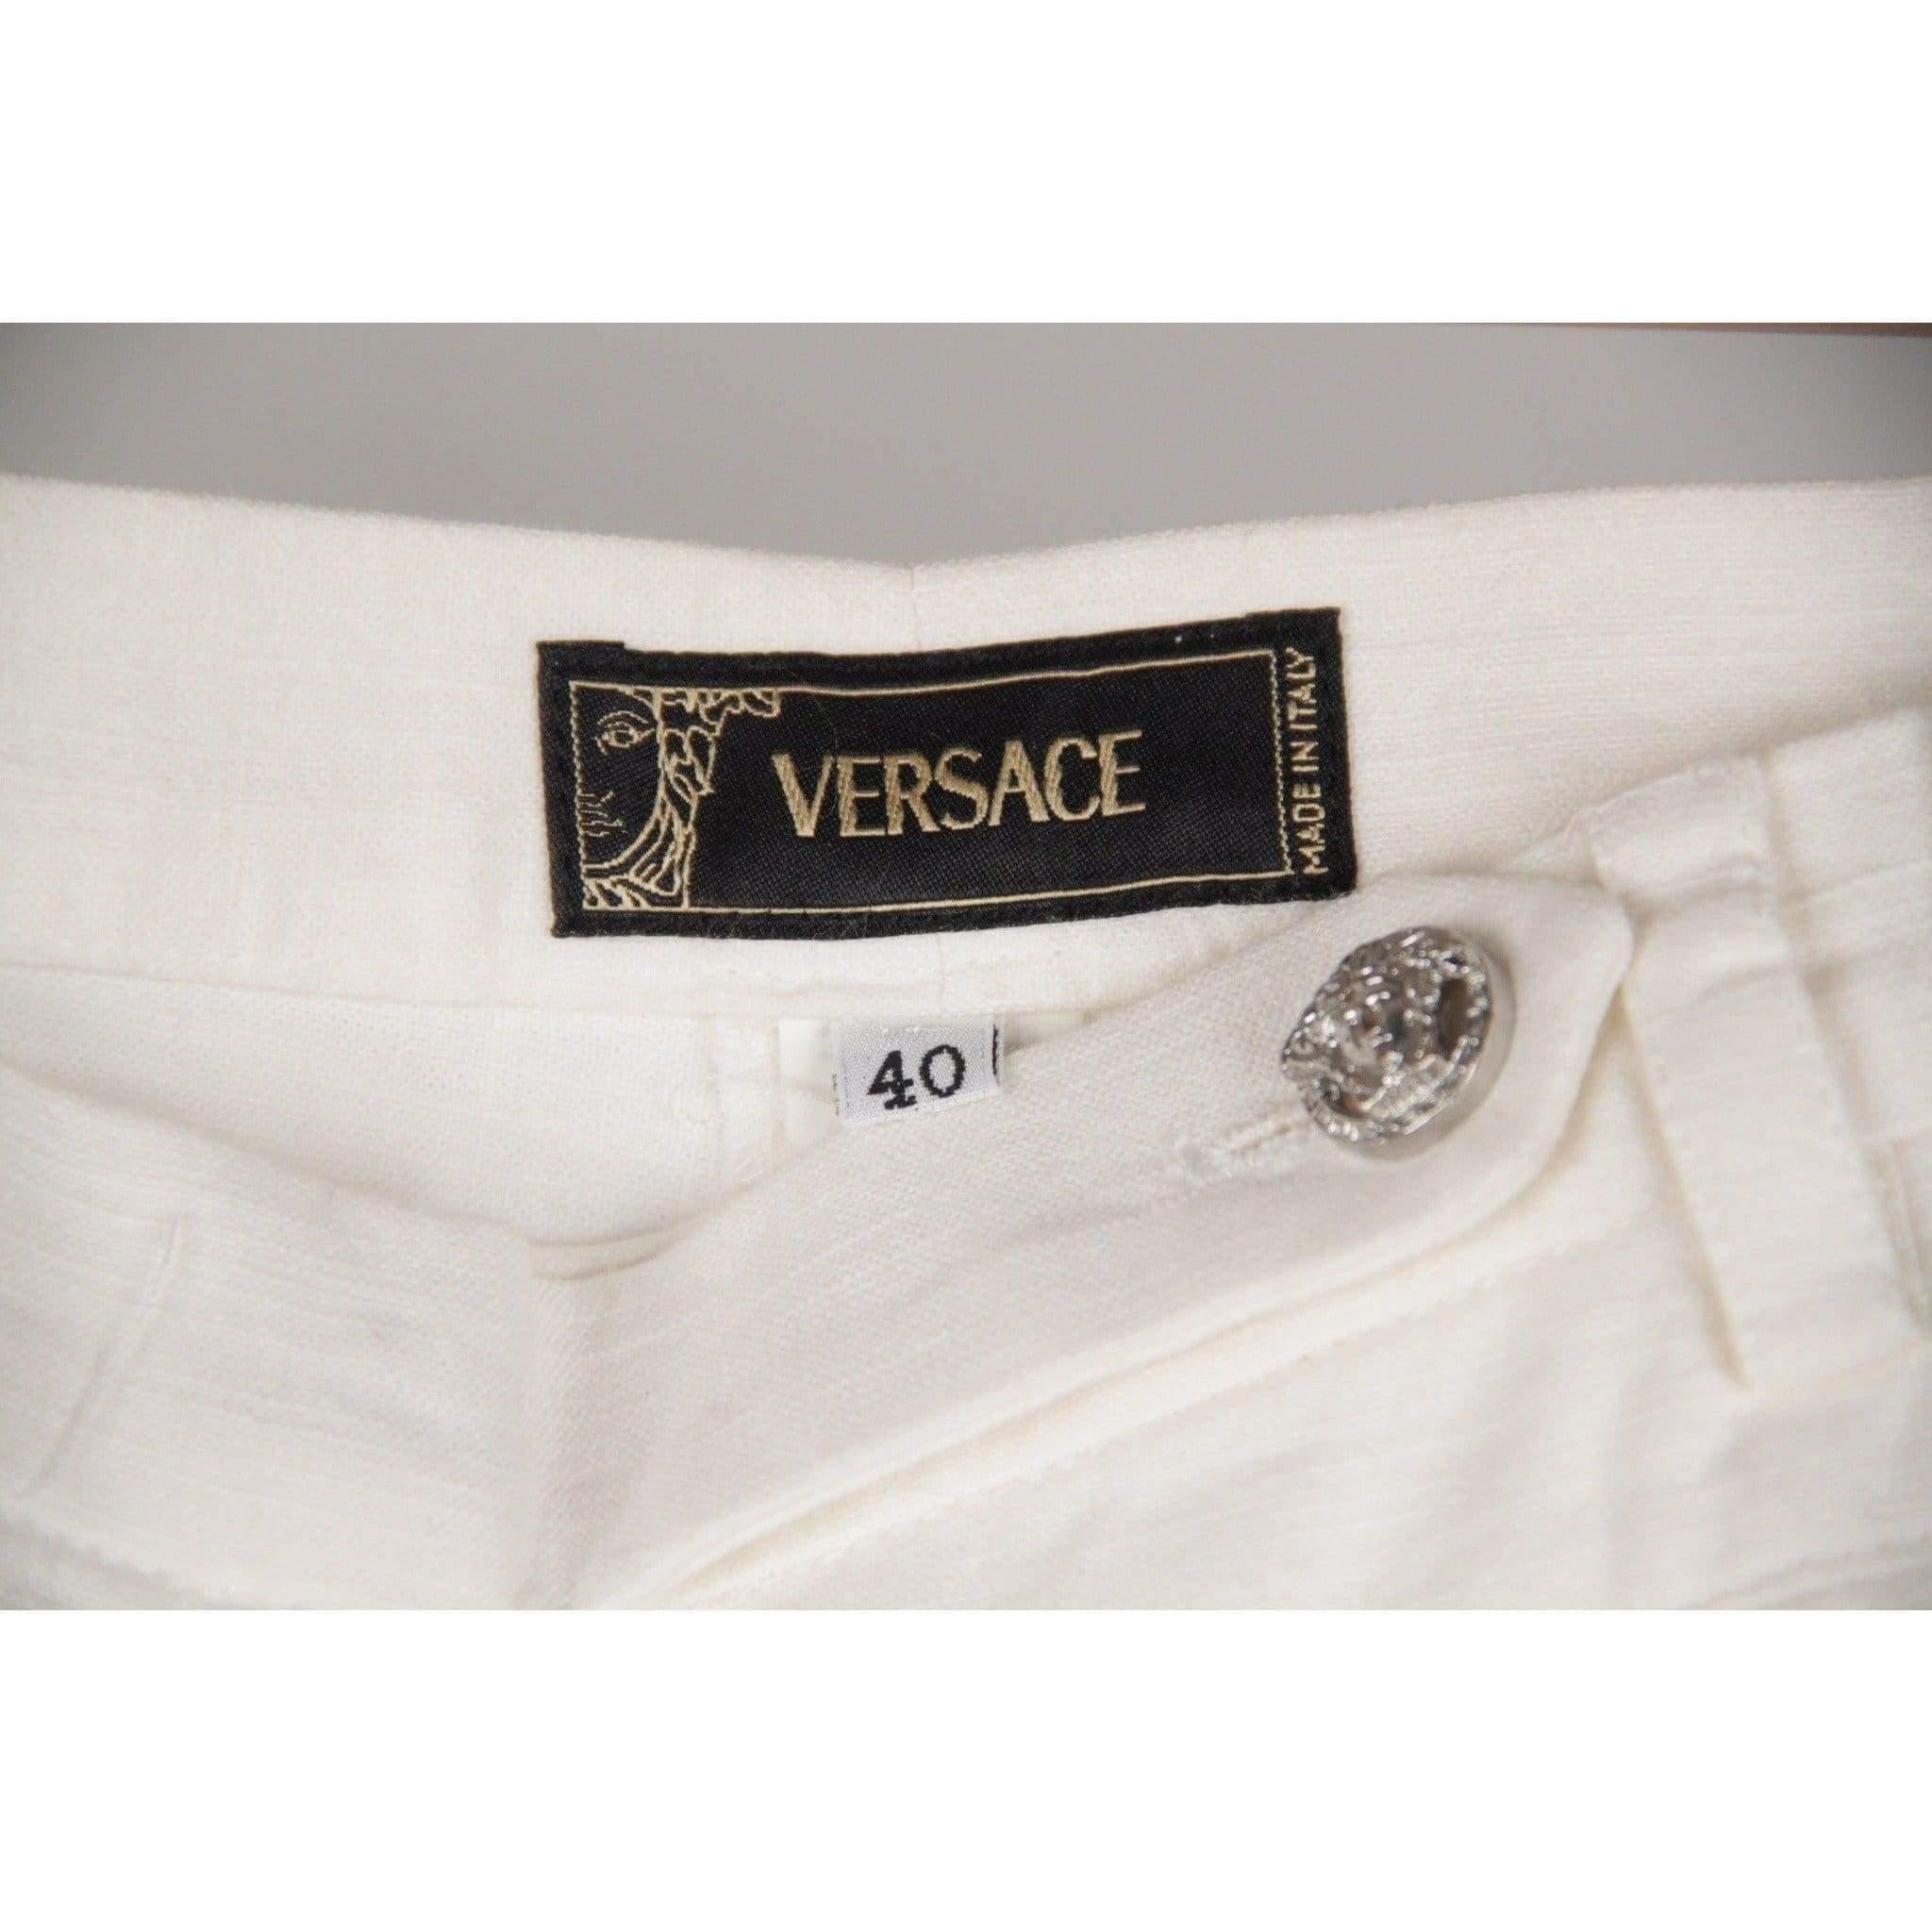 MATERIAL: Cotton, Linen COLOR: White MODEL: Trousers GENDER: Women SIZE: Small COUNTRY OF MANUFACTURE: Italy Condition CONDITION DETAILS: A :EXCELLENT CONDITION - Used once or twice. Looks mint. Imperceptible signs of wear - GENTLY USED!